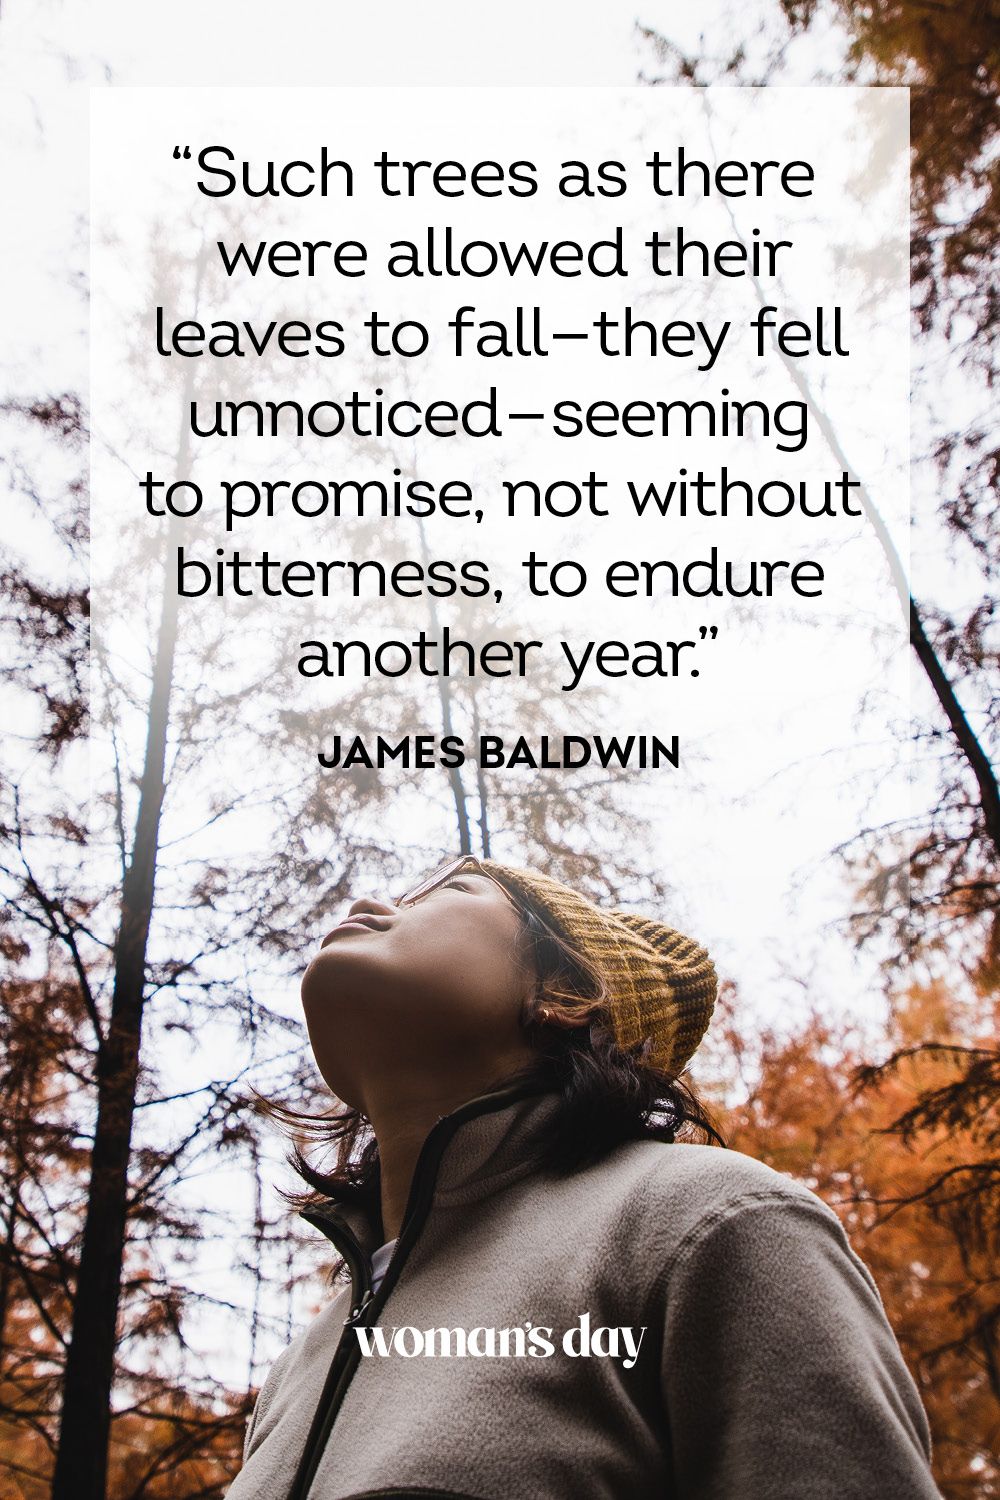 50 Best Fall Quotes 21 Inspirational Sayings And Phrases About Autumn